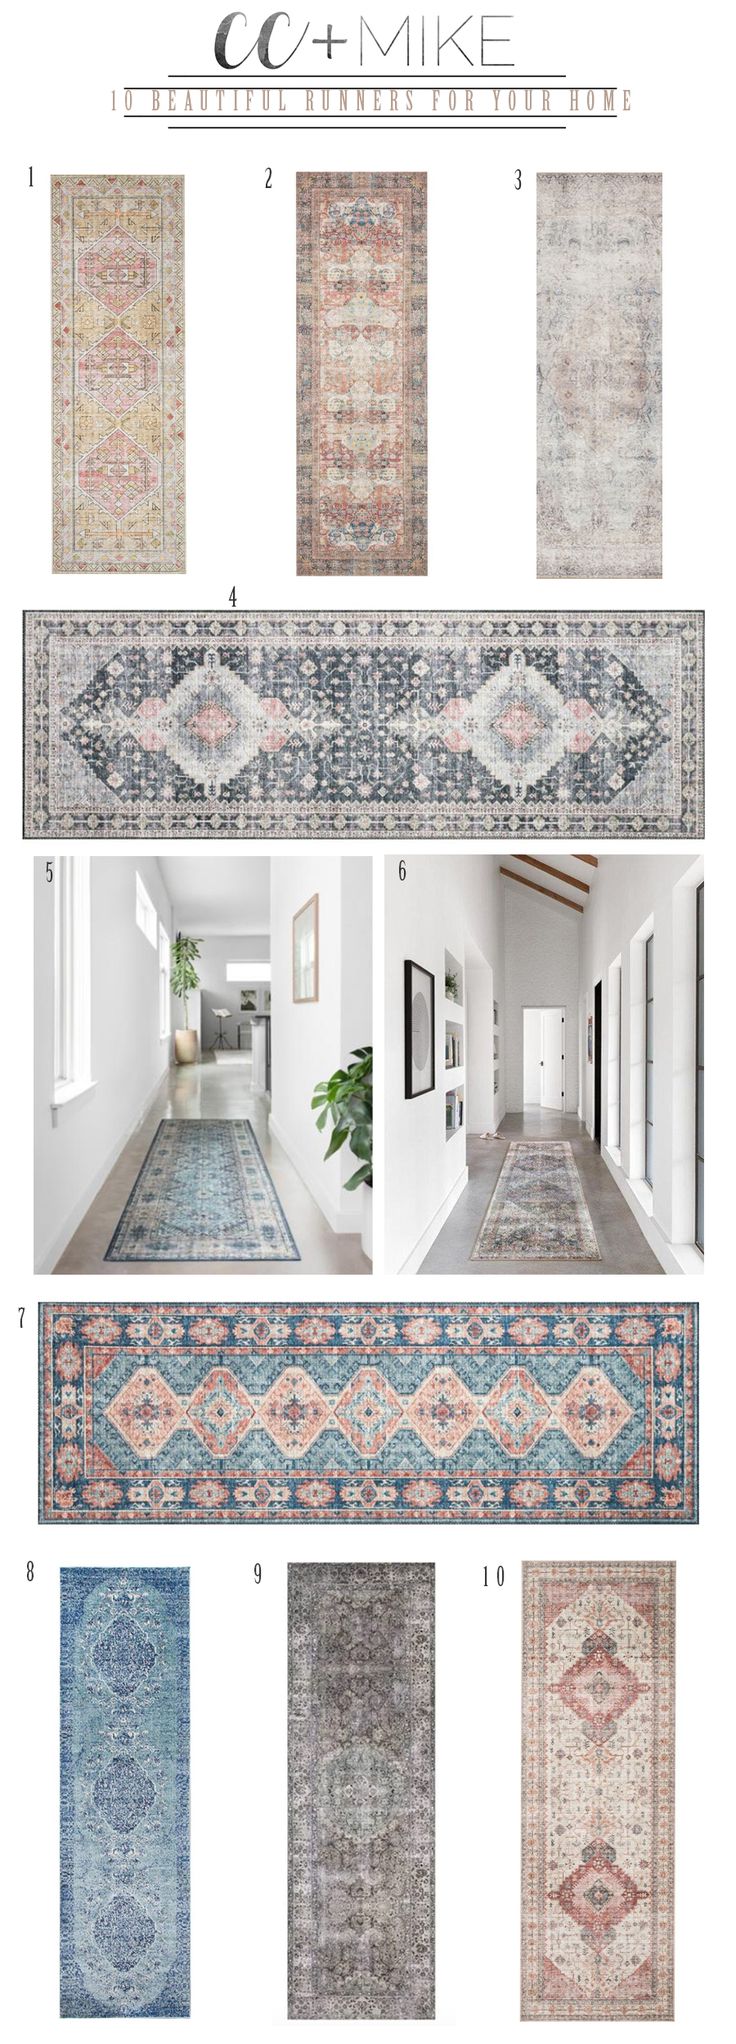 10 BEAUTIFUL KITCHEN RUNNERS FOR YOUR HOME